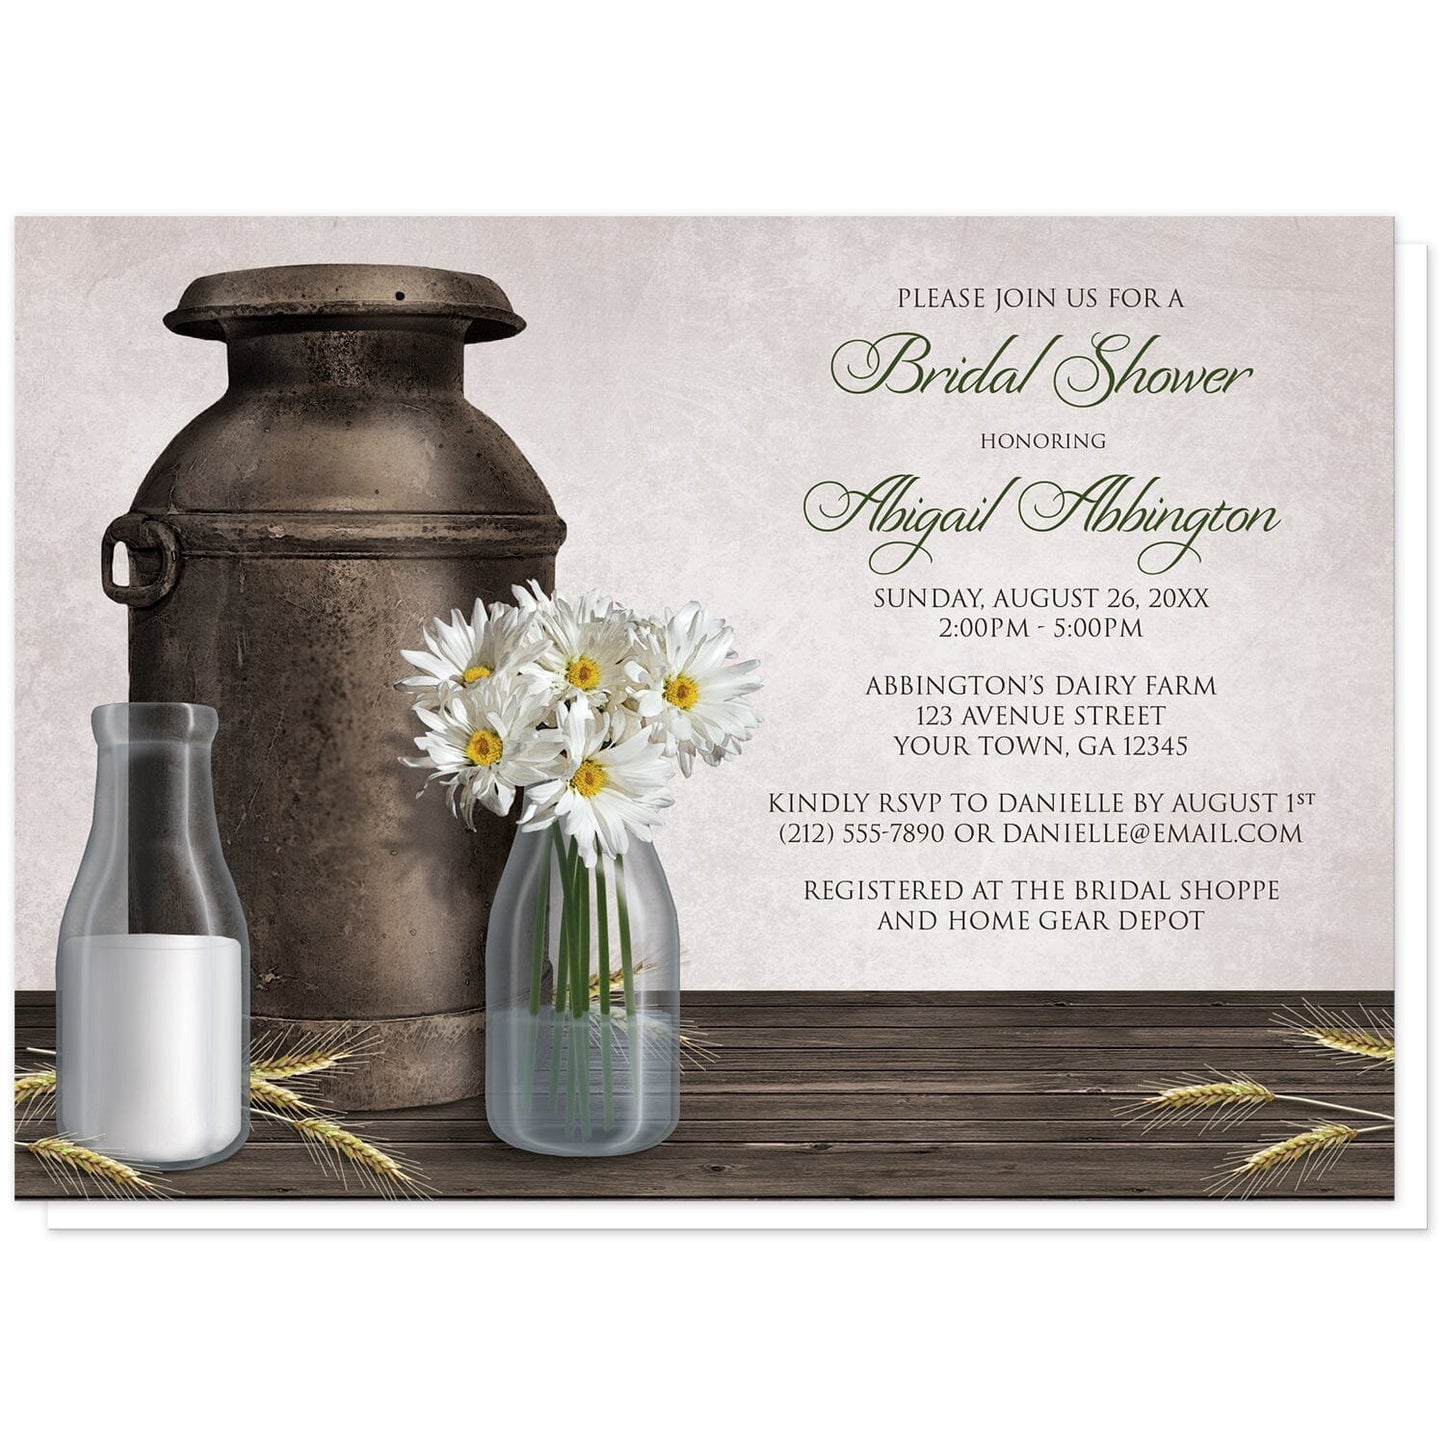 Rustic Country Dairy Farm Bridal Shower Invitations at Artistically Invited. Rustic country dairy farm bridal shower invitations with an illustration of an antique milk can, two milk bottles (one with milk, the other with white daisies and water) on a dark wood tabletop with hay stems. Your personalized bridal shower celebration details are custom printed in brown and green over a light parchment-colored background.